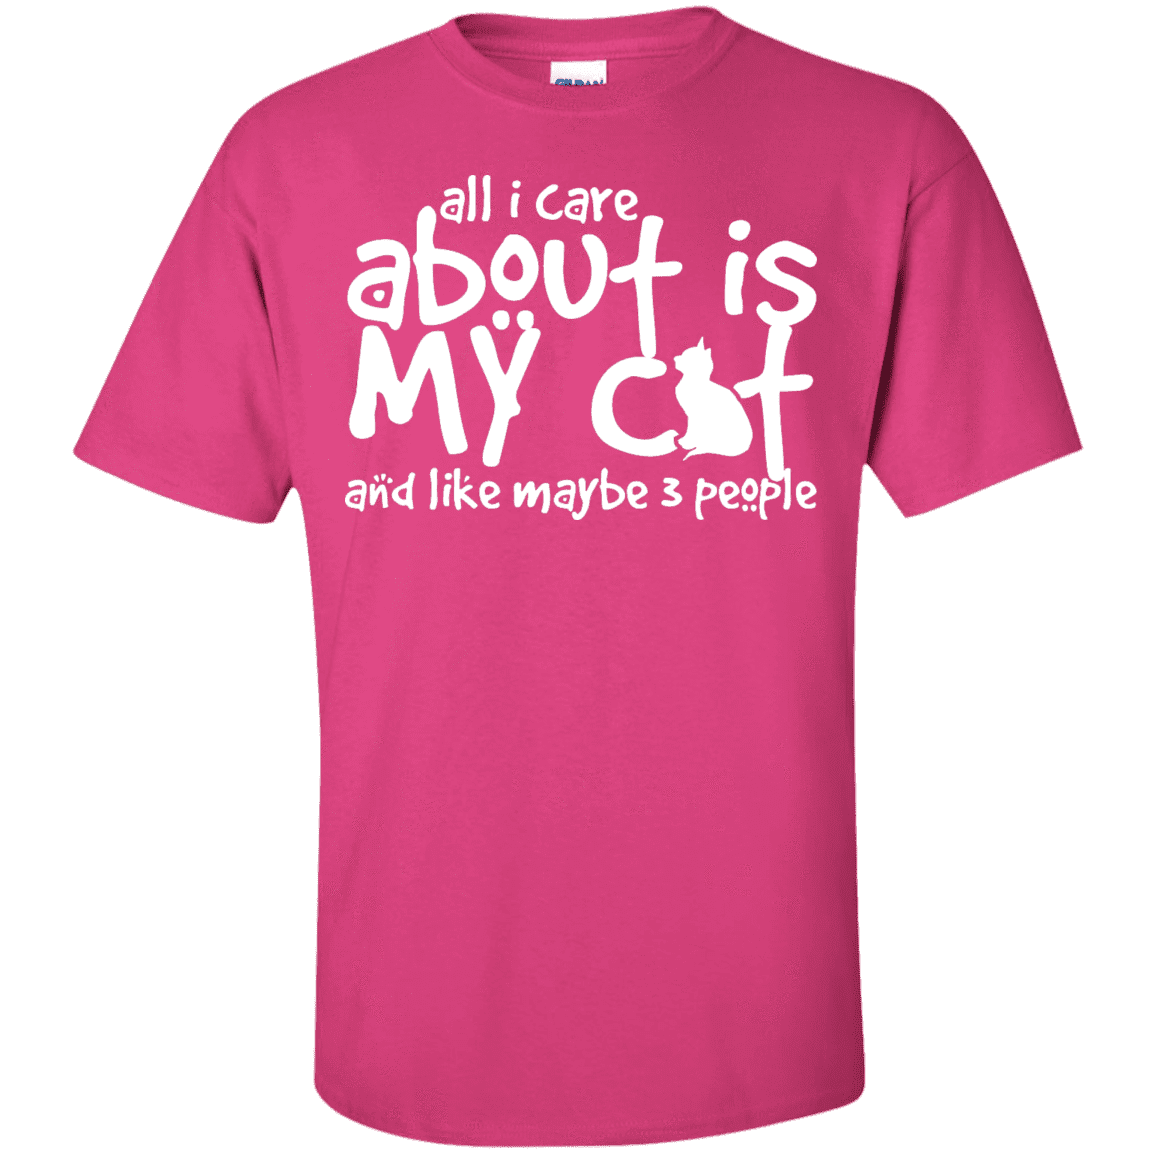 All I Care About Is My Cat - T Shirt.